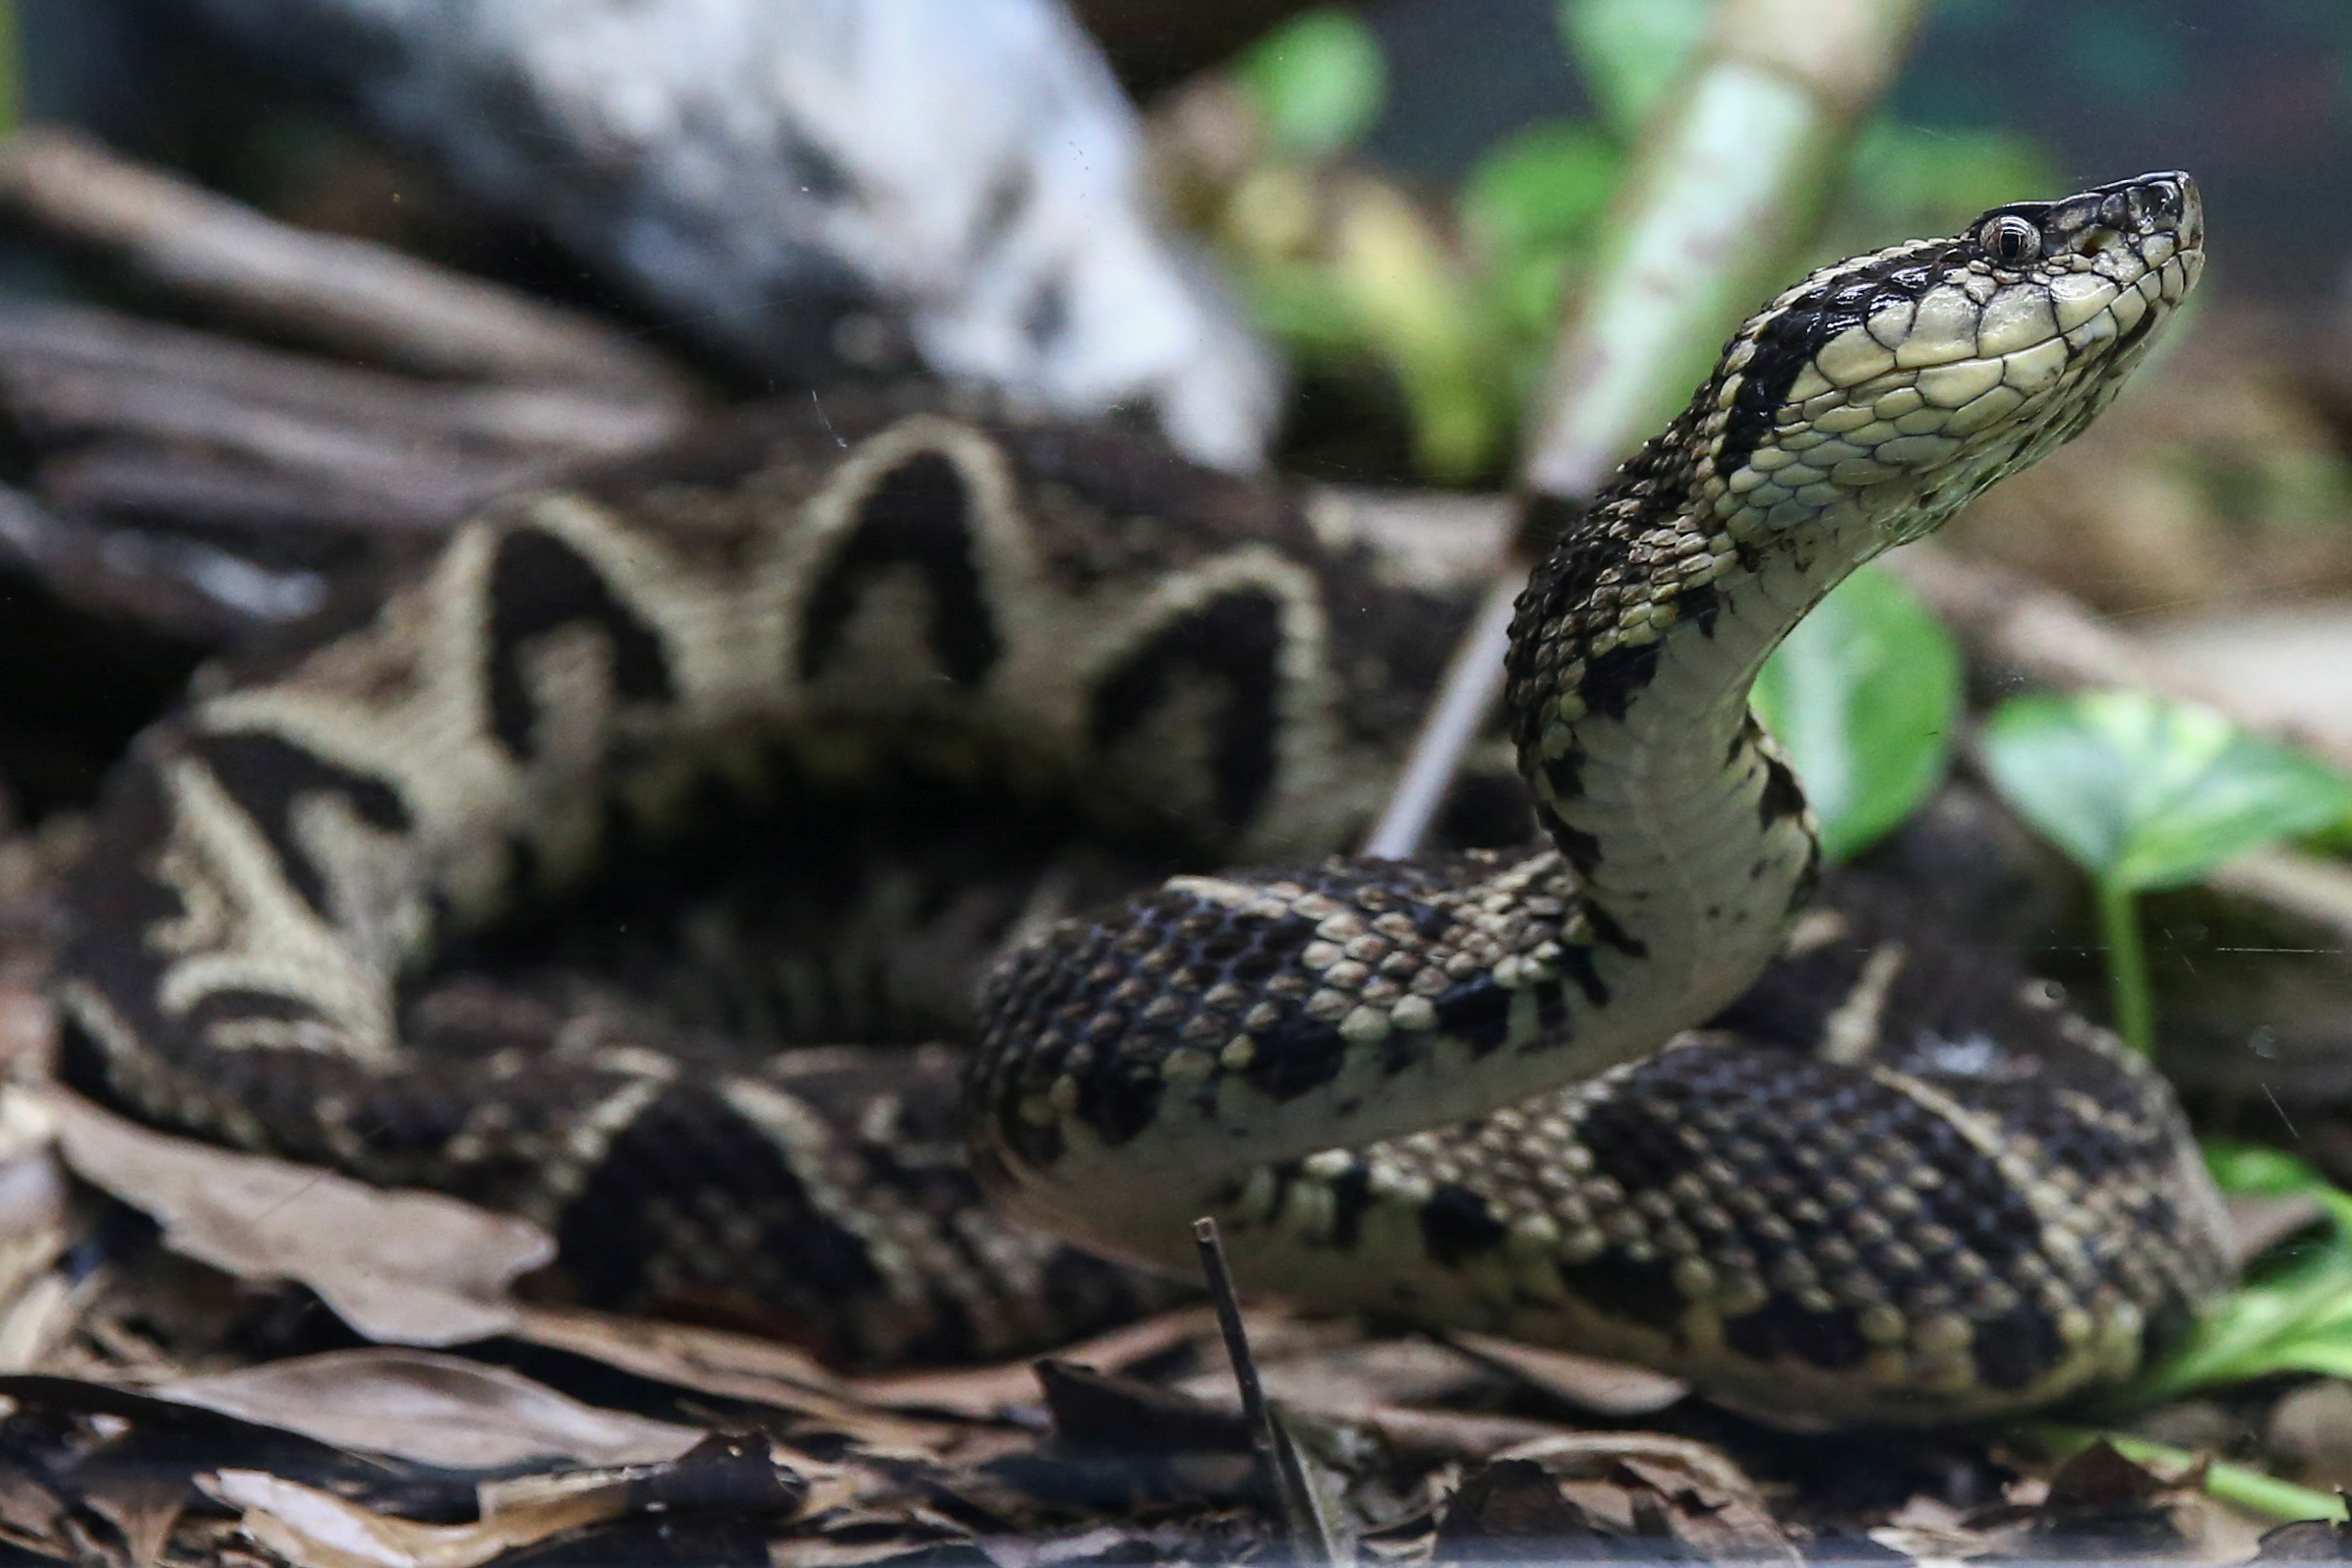 A jararacussu snake, whose venom is used in a study against the coronavirus disease (COVID-19), is seen at Butantan Institute in Sao Paulo, Brazil August 27, 2021. Picture taken August 27, 2021. REUTERS/Carla Carniel